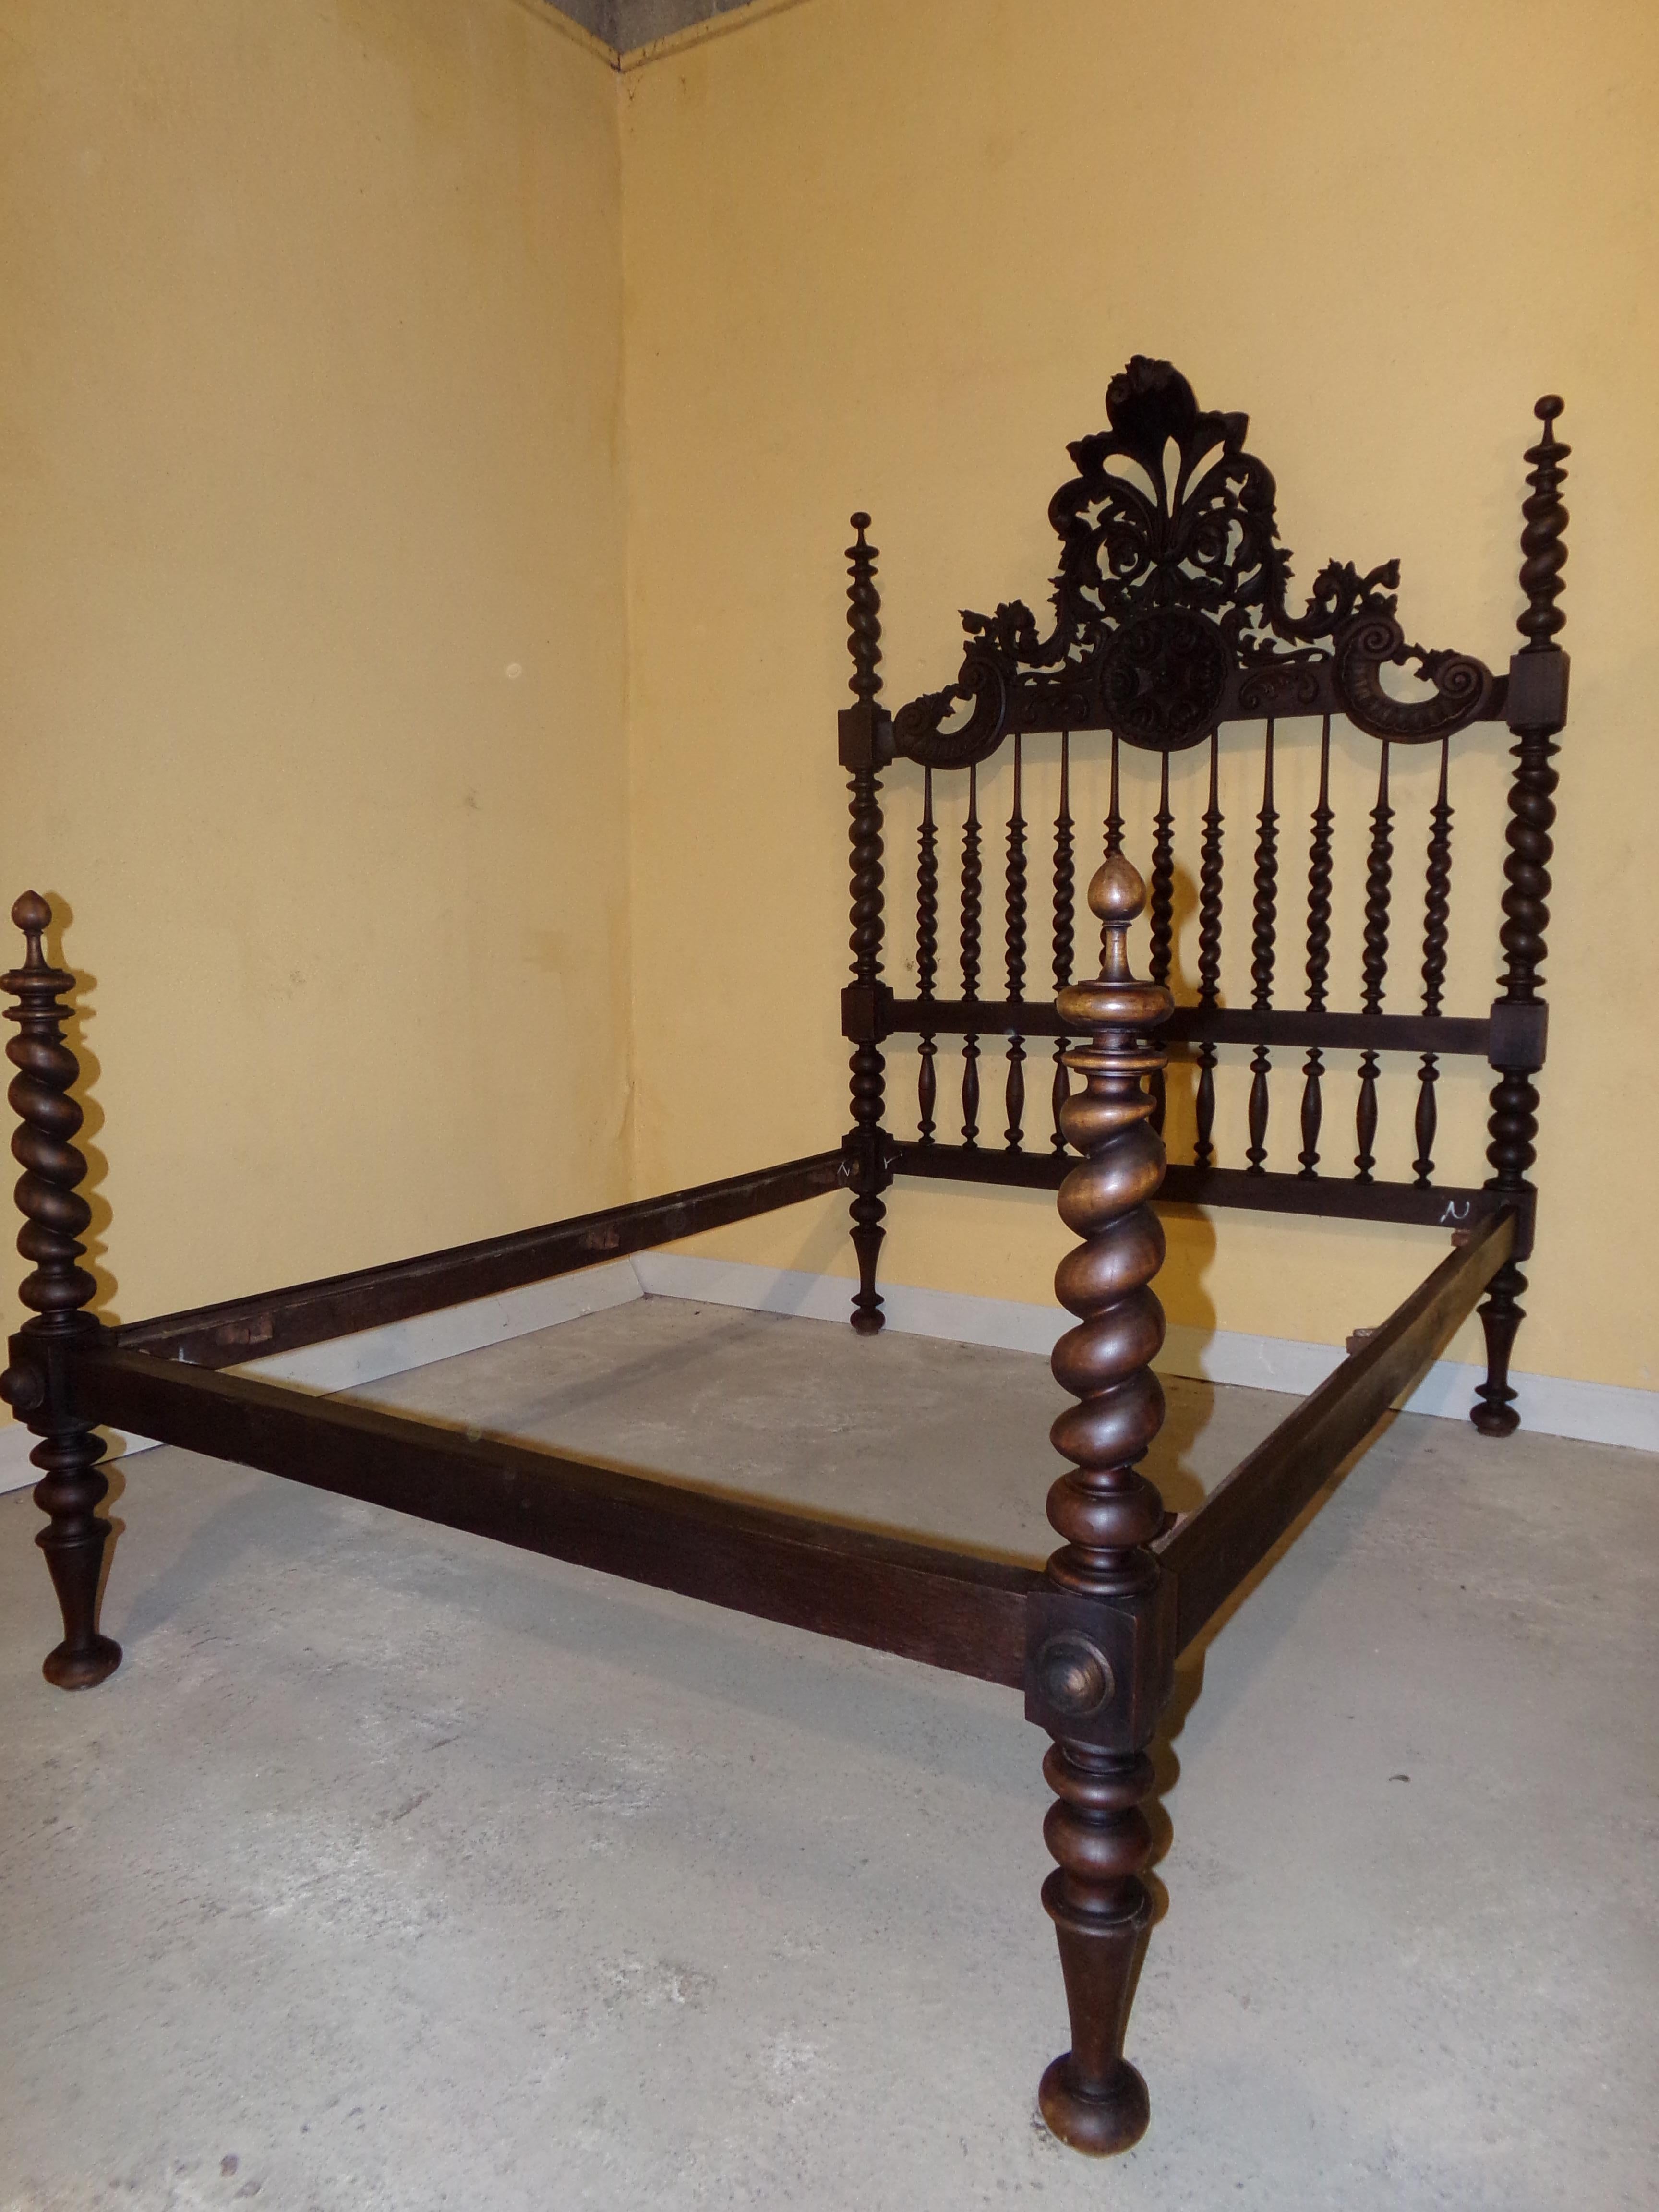 An outstanding grand Portuguese Four Poster double bed in original condition circa 1890 in solid hand-turned mahogany with a fine original patination
As European beds seldom are the same size as American ones we provide free of charge an easily